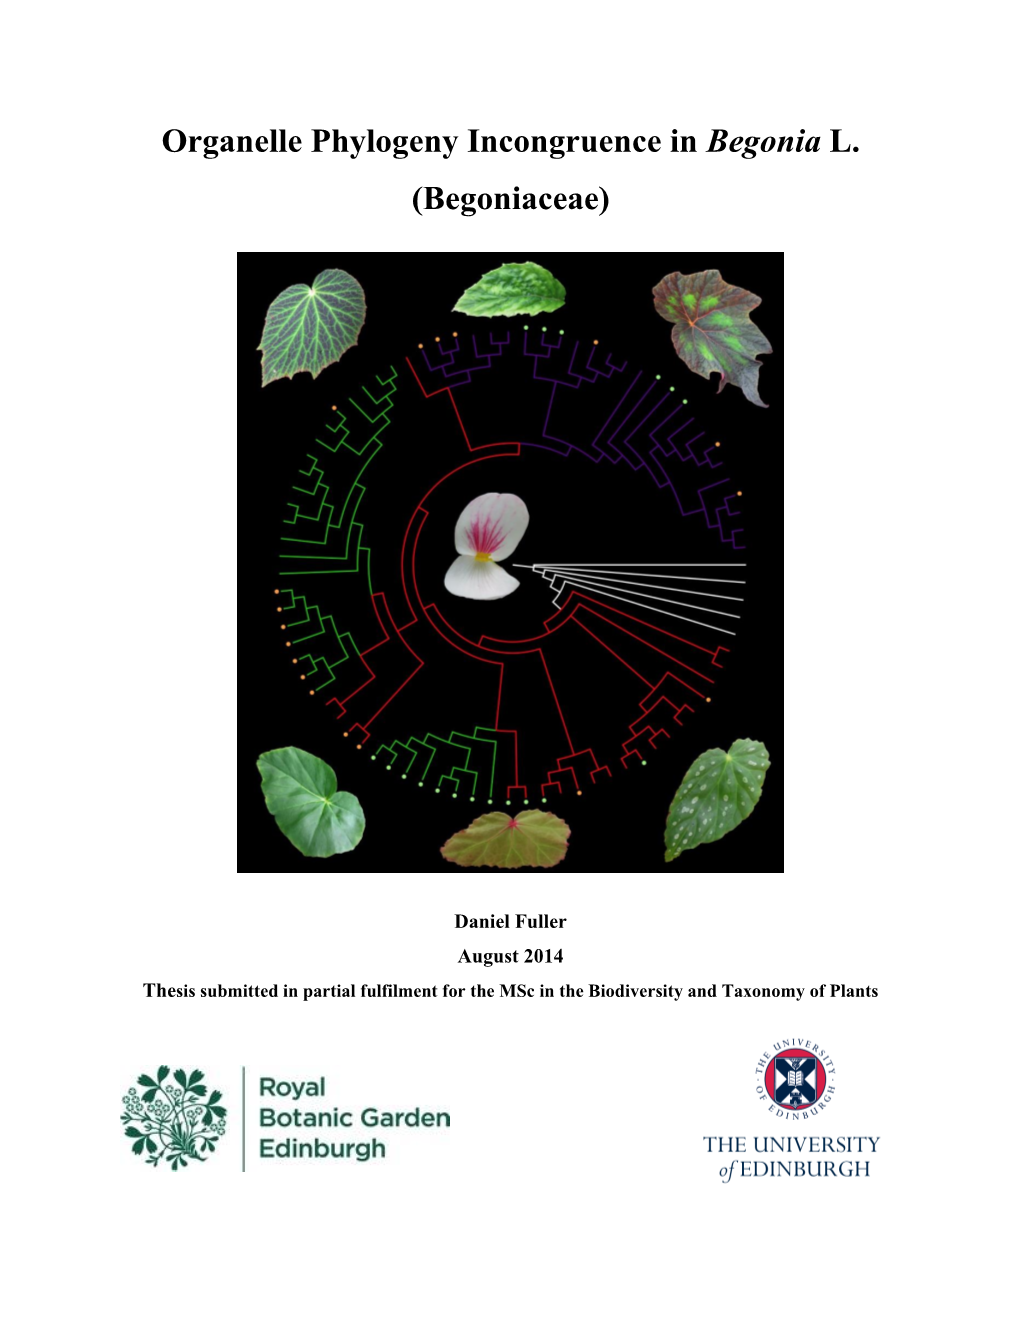 Organelle Phylogeny Incongruence in Begonia L. (Begoniaceae)